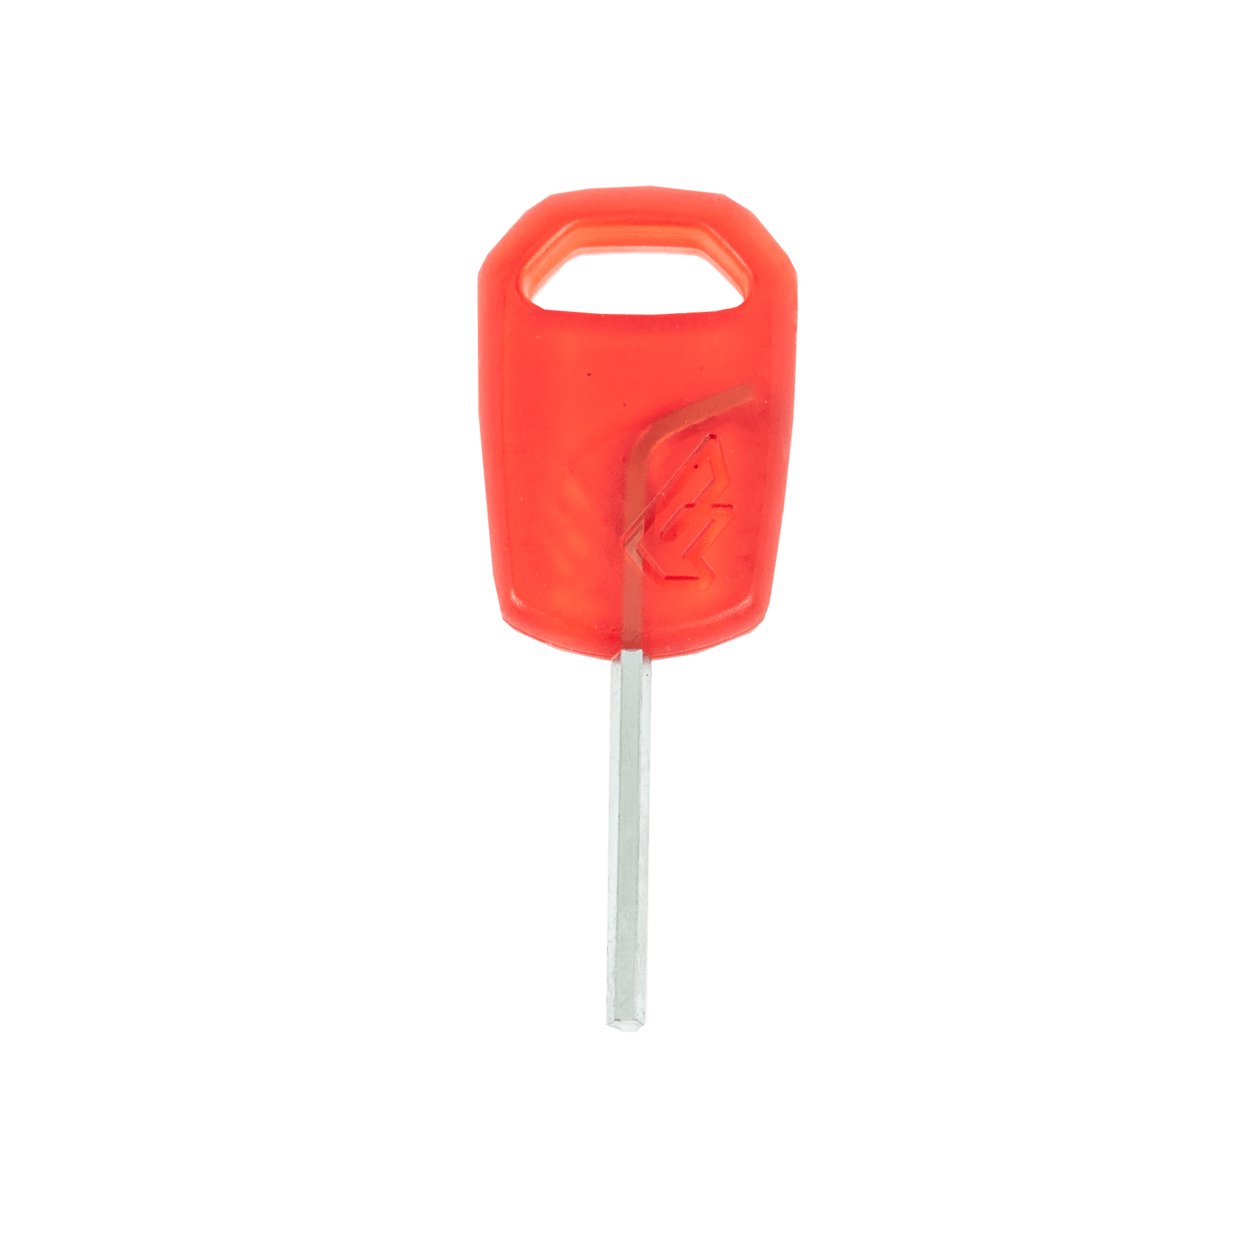 Fanatic Fin Key 2023 - Worthing Watersports - 9008415936601 - Spareparts - Fanatic SUP